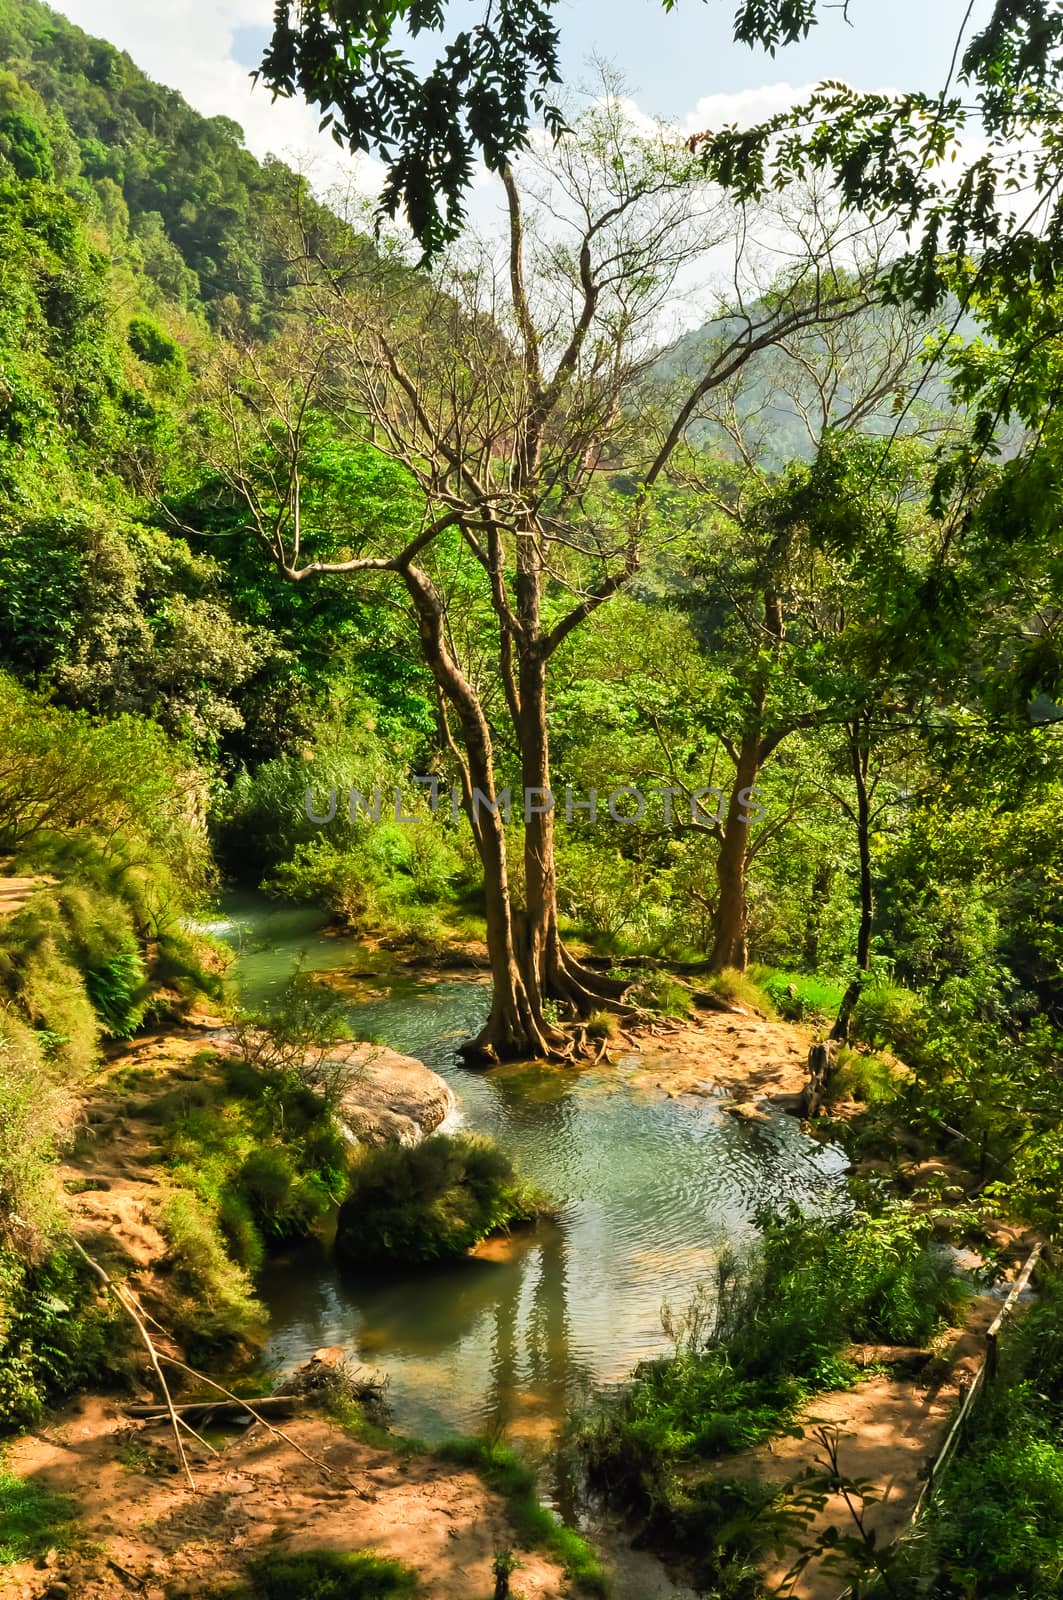 Upstream of the Vat spring which flows to Dai Yem (Pink Blouse) waterfall, Moc Chau, Son La, Vietnam. Floral stretch of land with stunning view of surrounding mountainous. Early days of life on earth